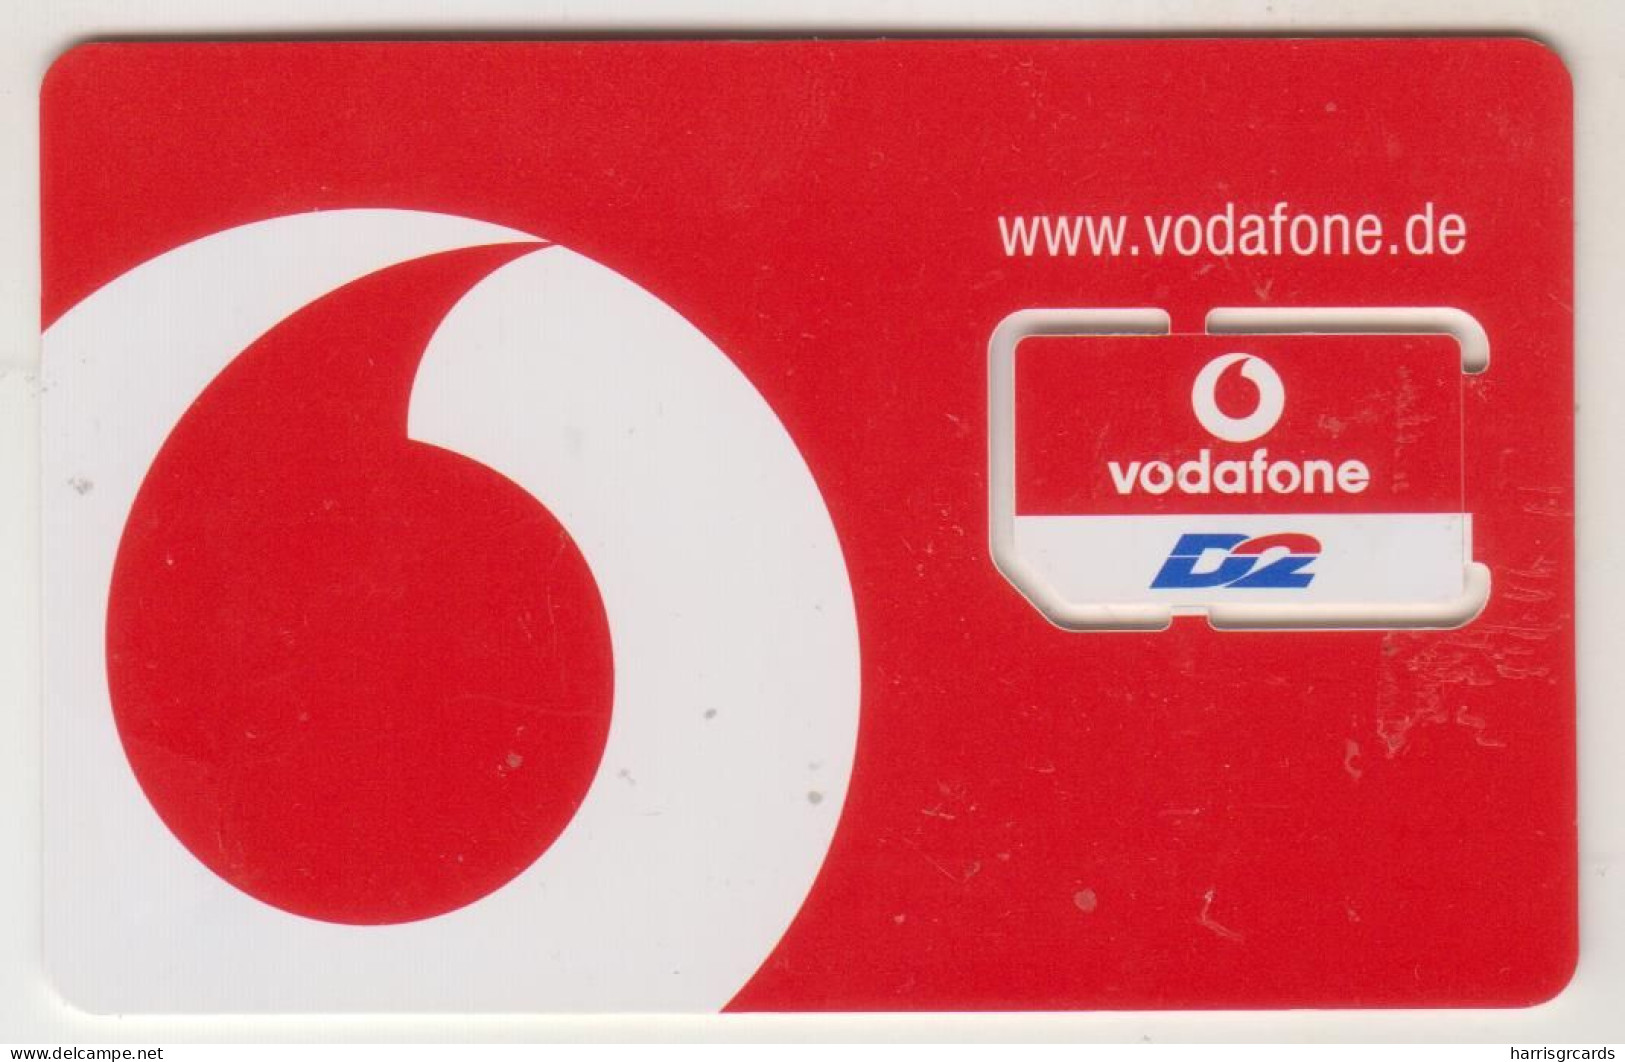 GERMANY - How Are You? , Vodafone GSM Card , Mint - GSM, Cartes Prepayées & Recharges